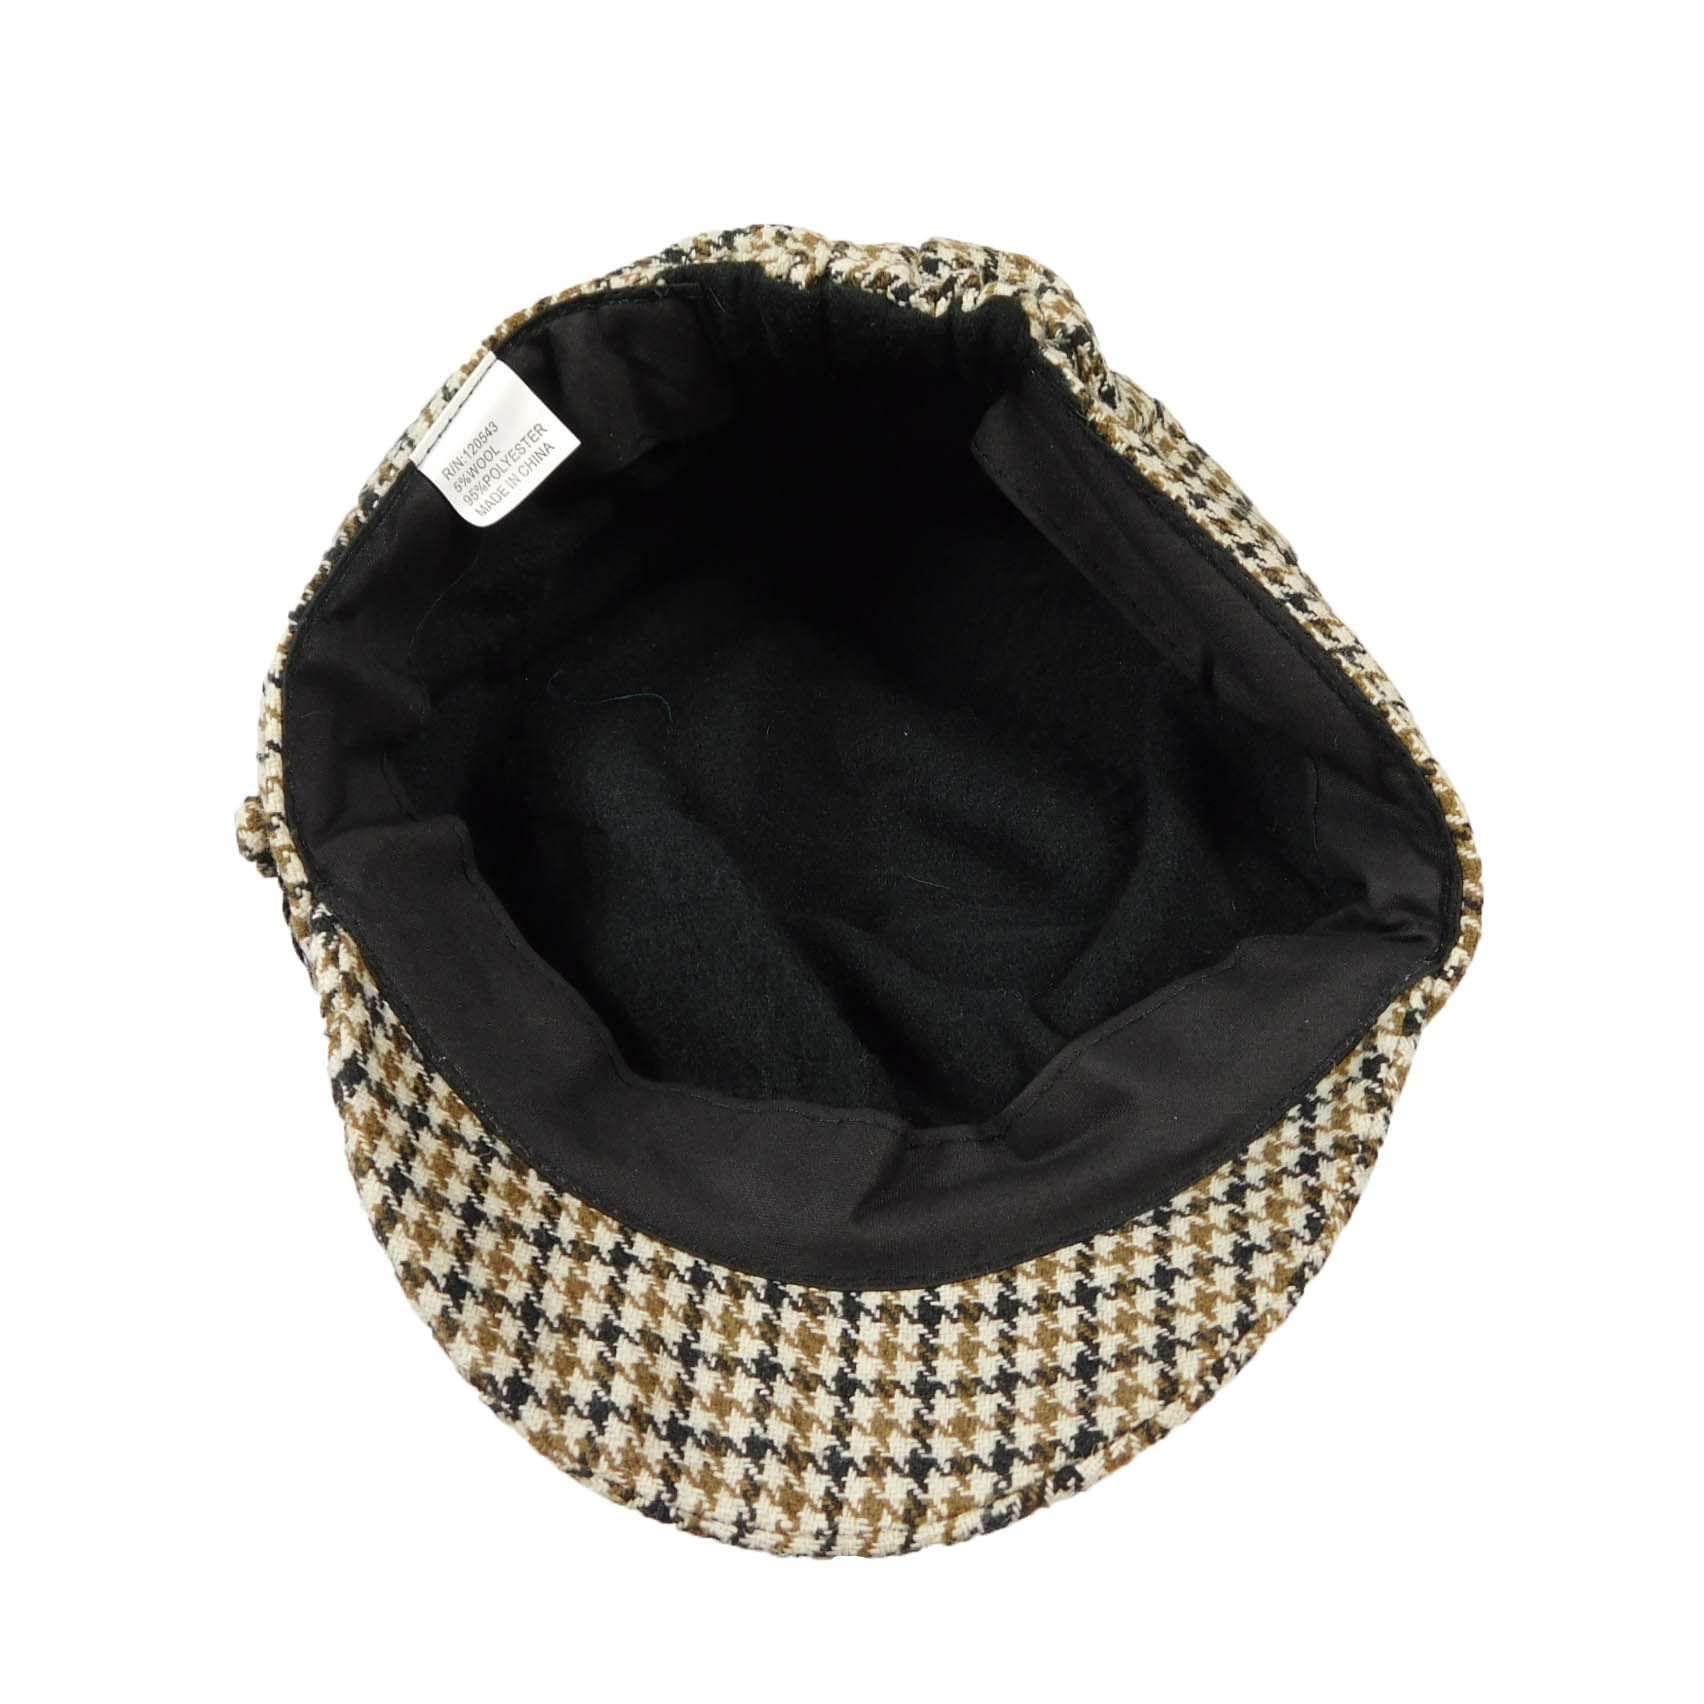 Cap with Leather Band, Cap - SetarTrading Hats 